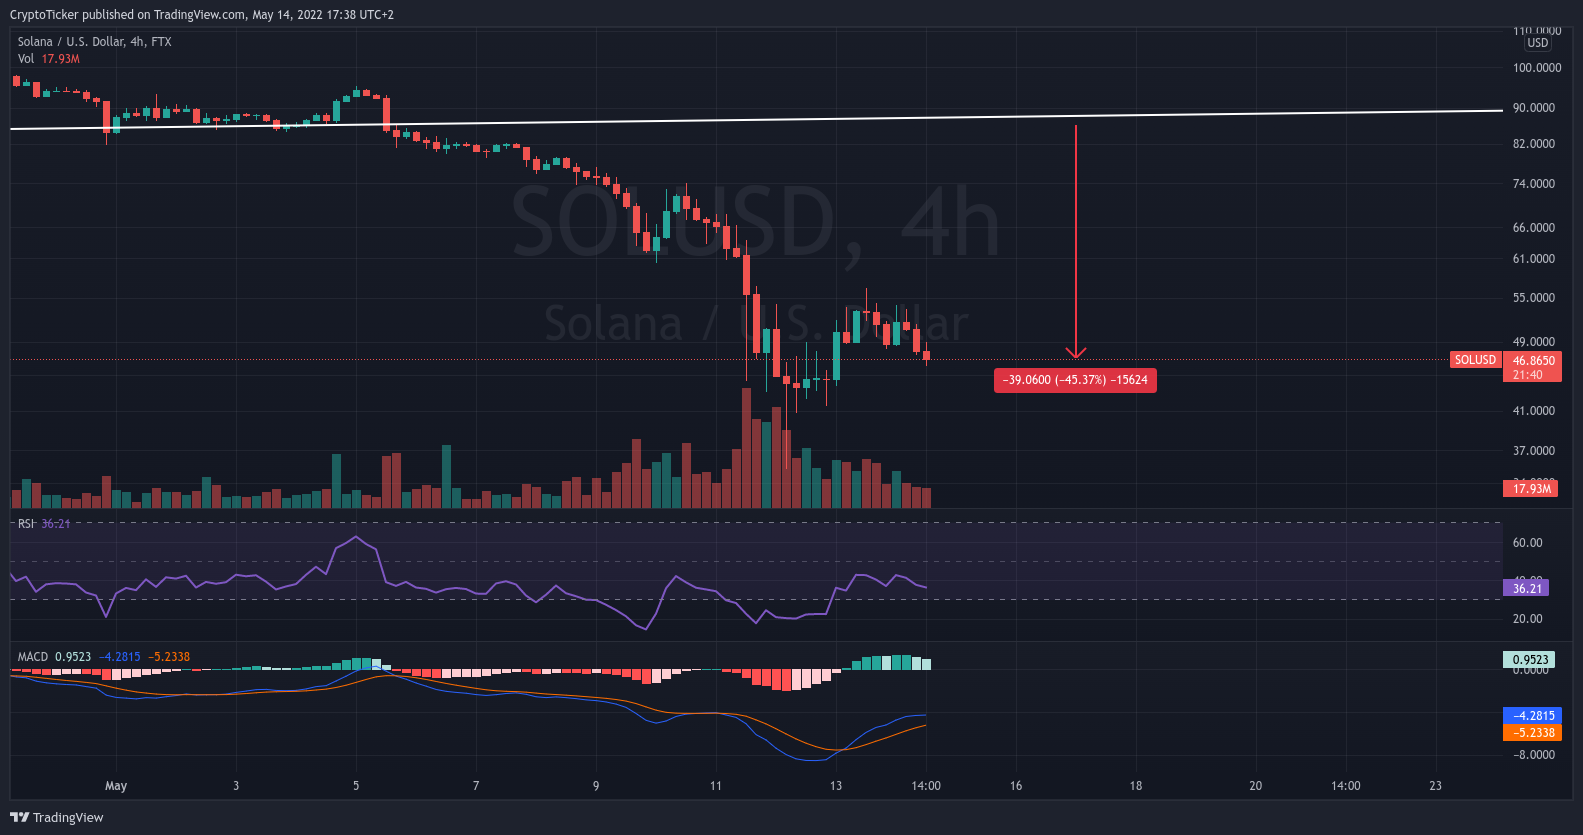 SOL/USD 4-hours chart showing the crash of Solana